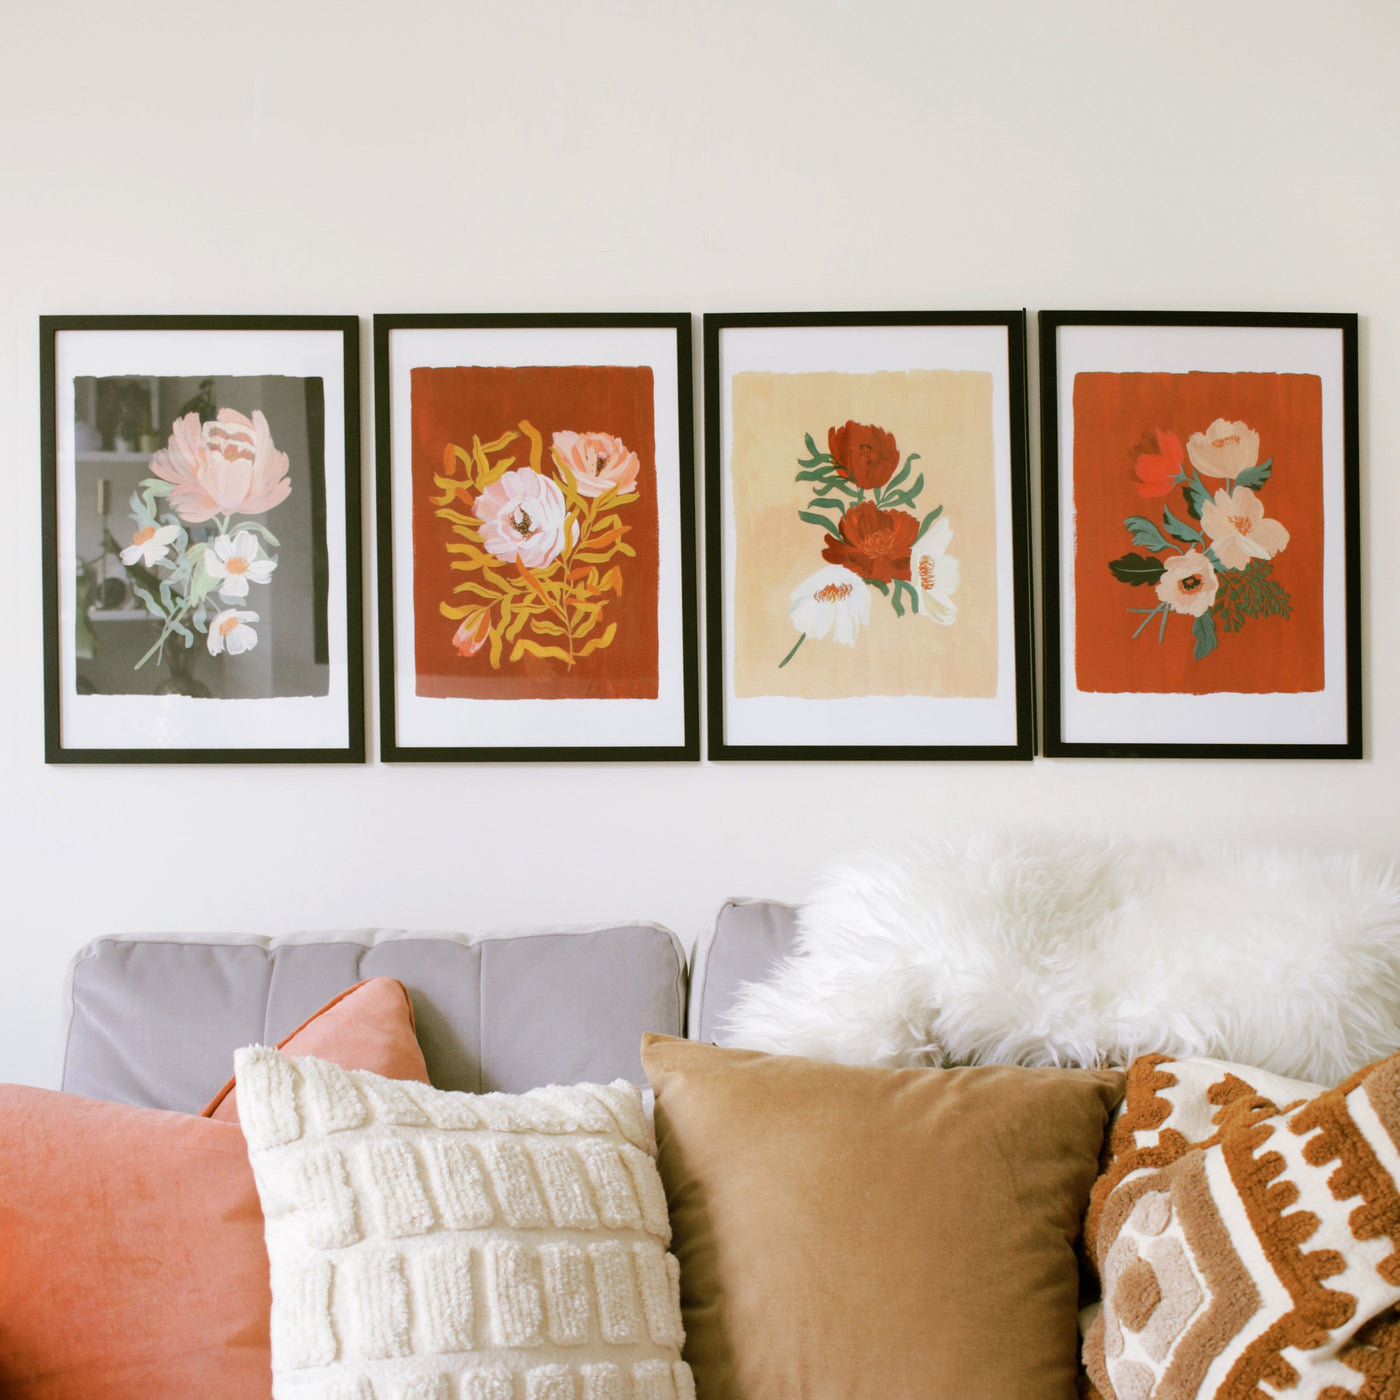 A3 Floral Print With Red and White Cosmos Flowers In A Black Frame -  Annie Dornan-Smith